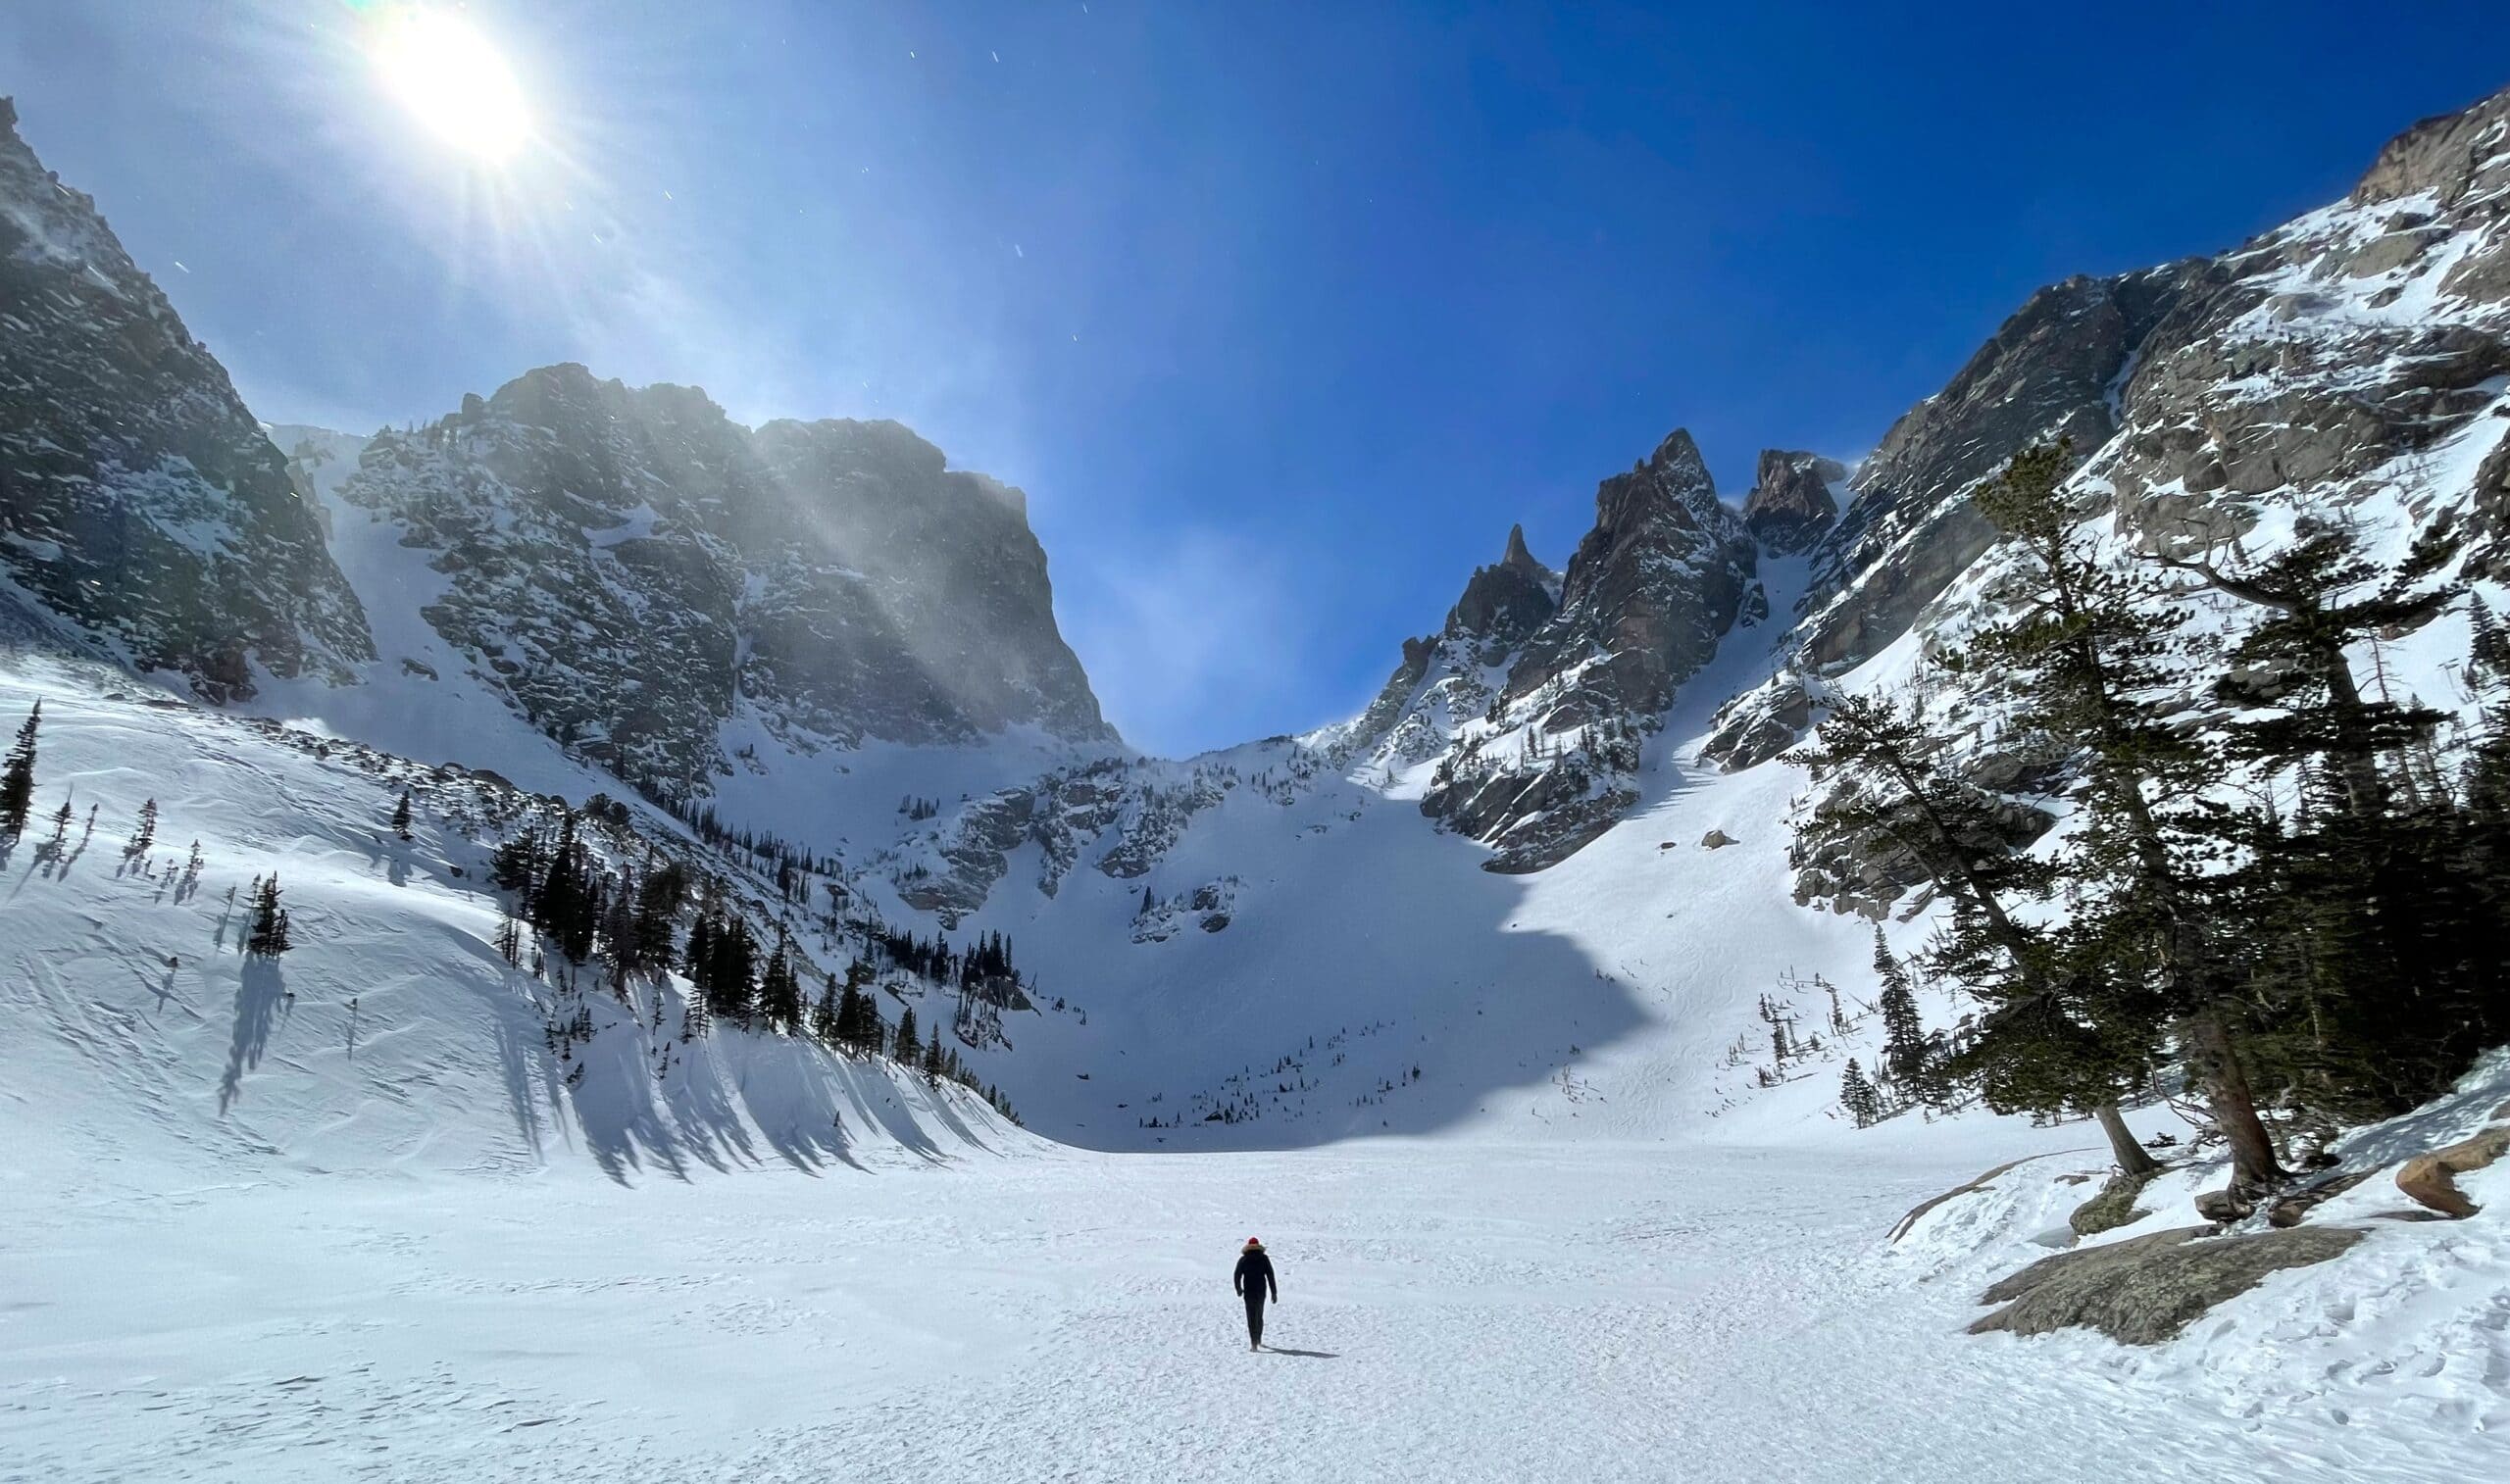 Hiking in Rocky Mountain National Park during winter